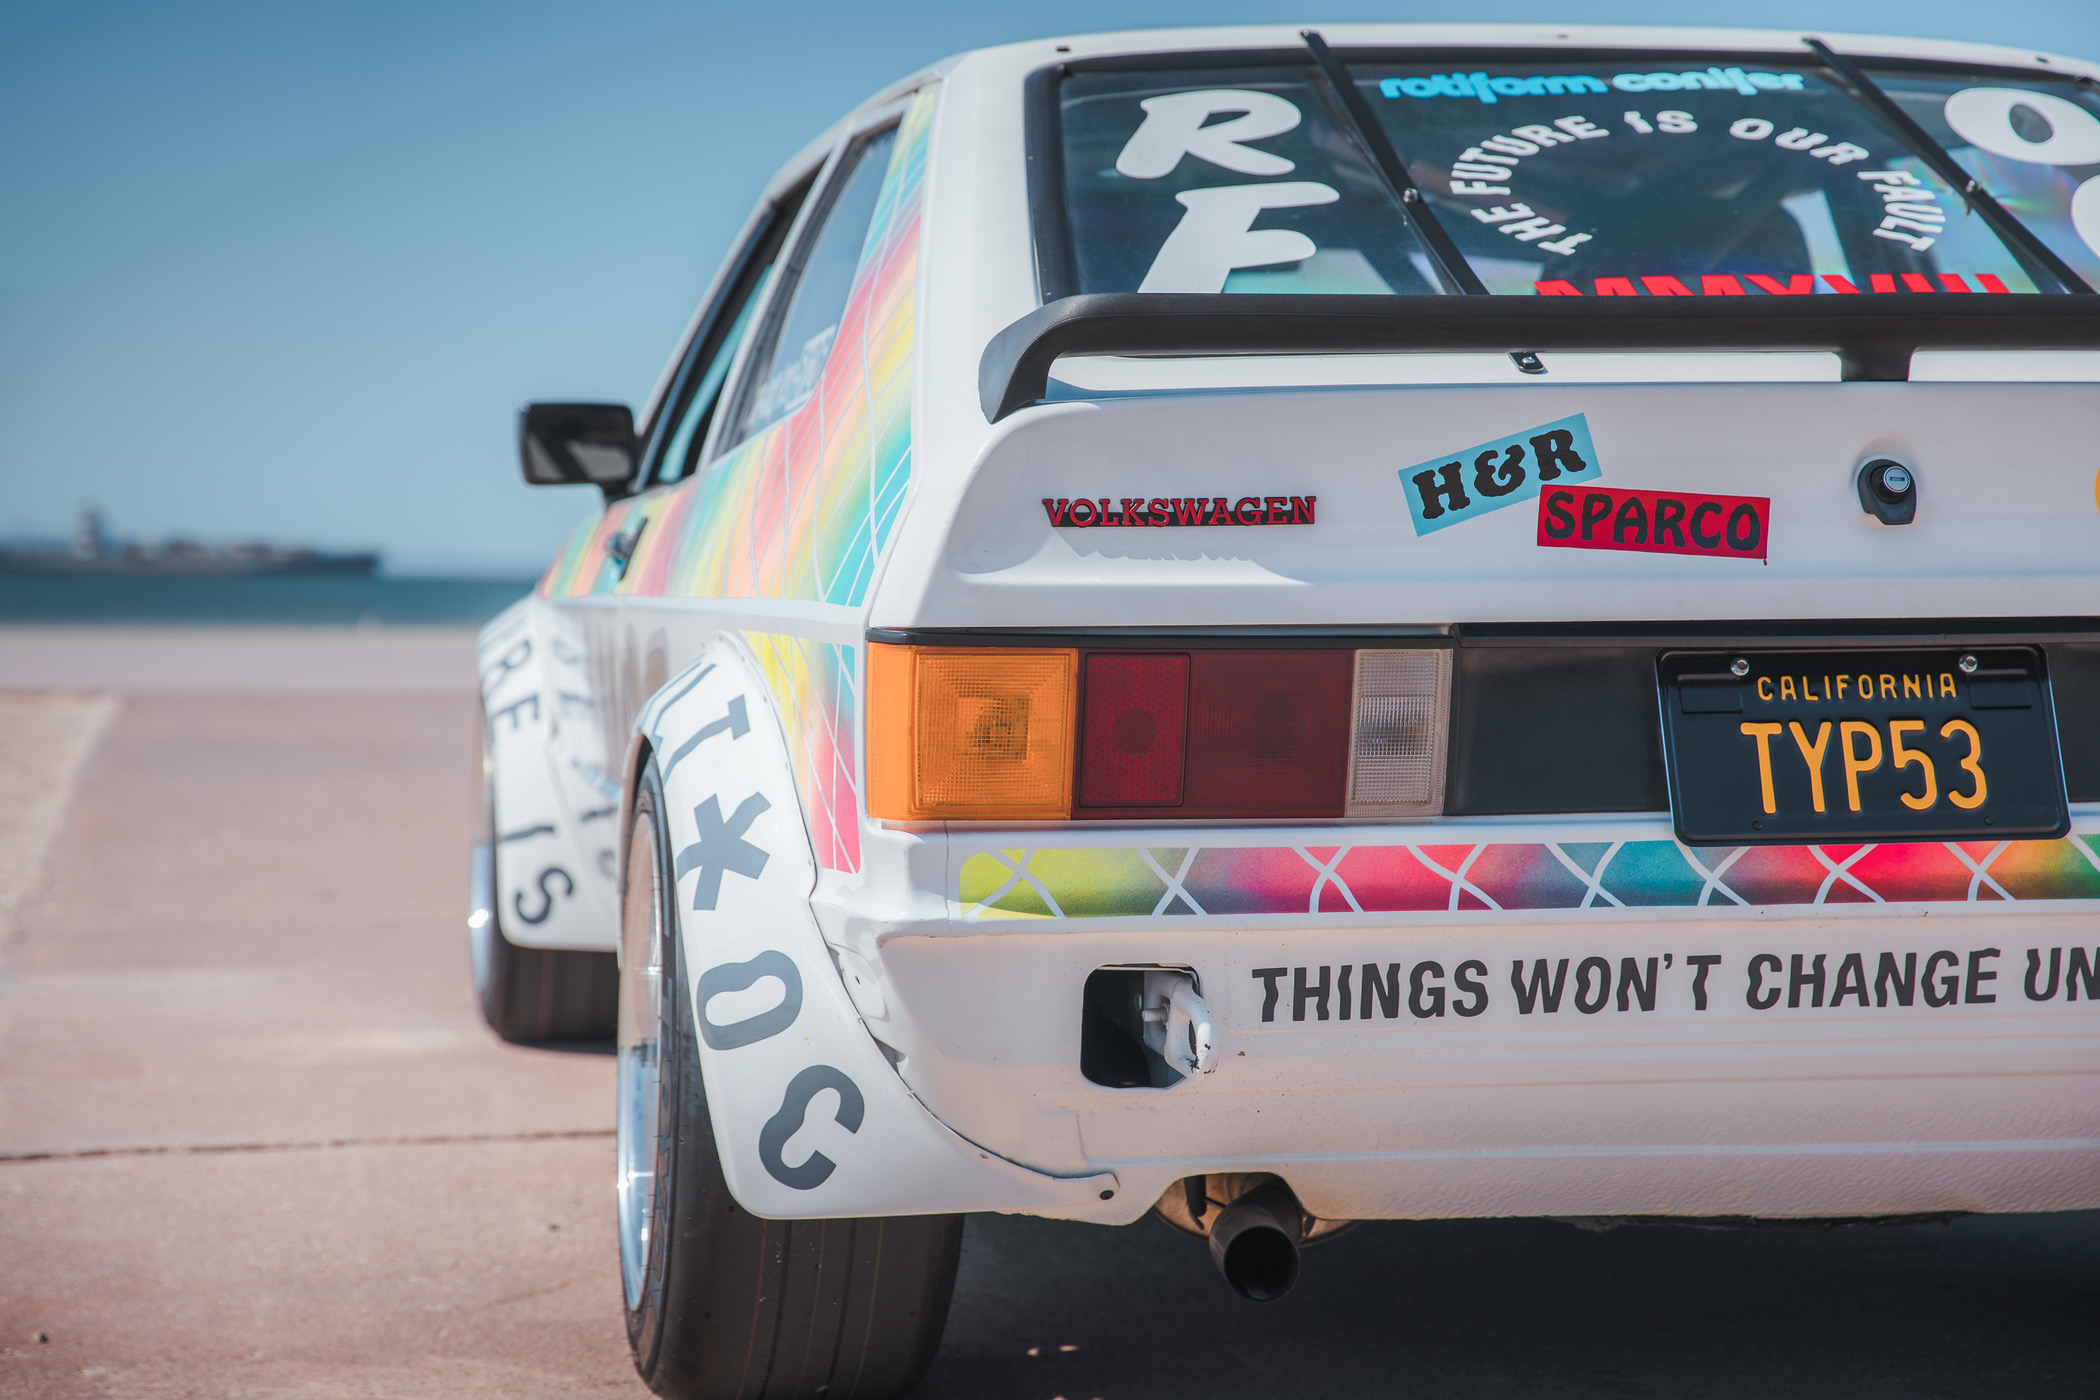 Volkswagen Scirocco, How a $7,000 car became the ‘Million-Dollar’ Scirocco, ClassicCars.com Journal